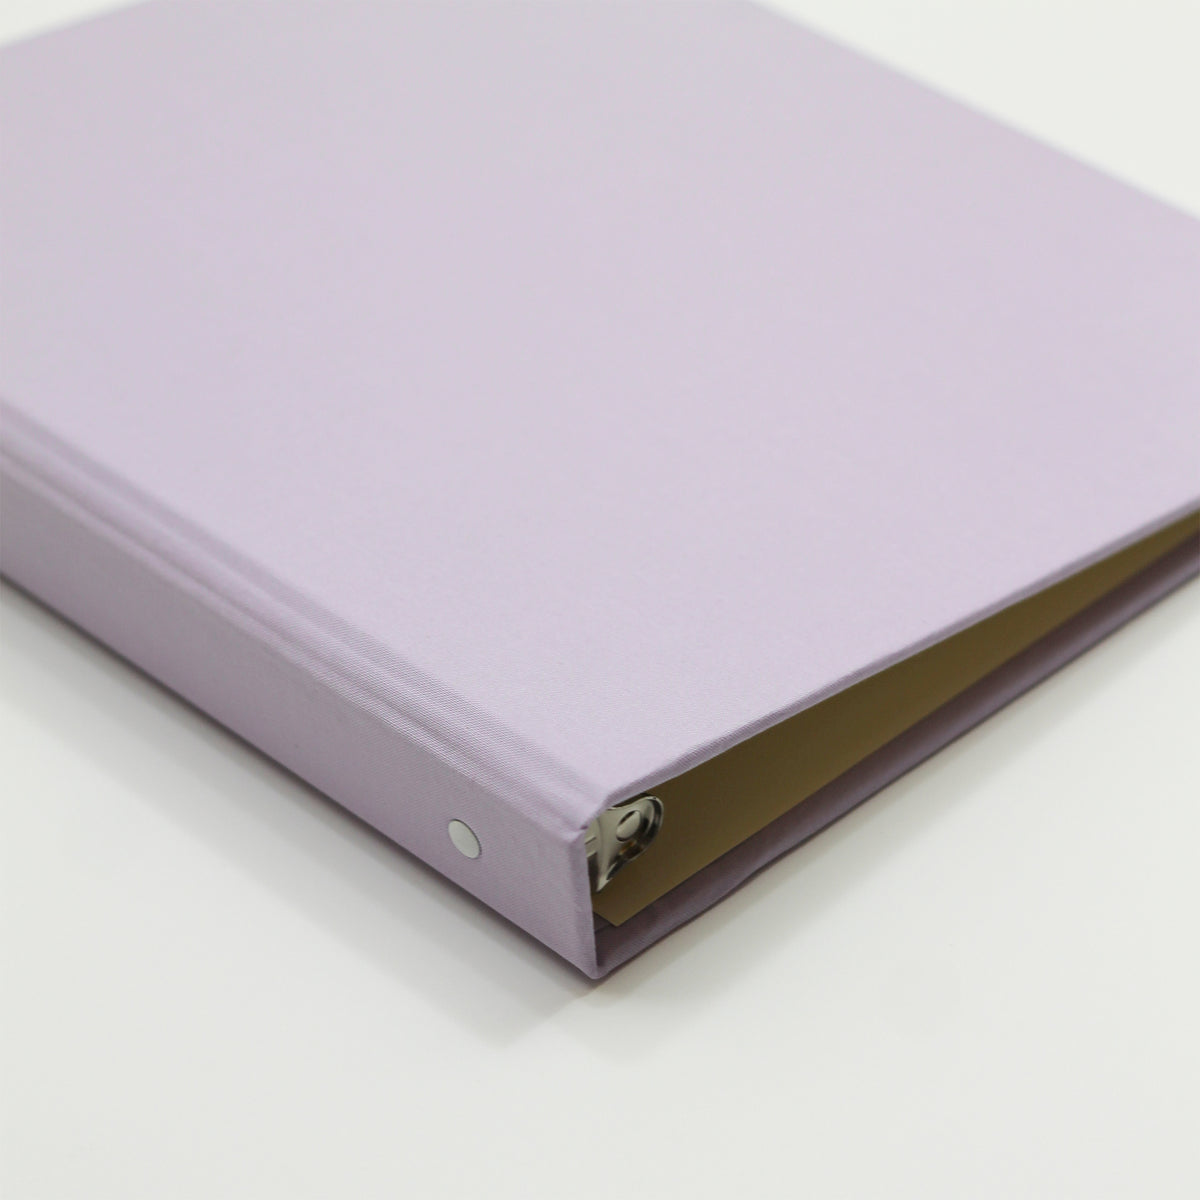 Storage Binder for Photos or Documents with Lavender Cotton Cover